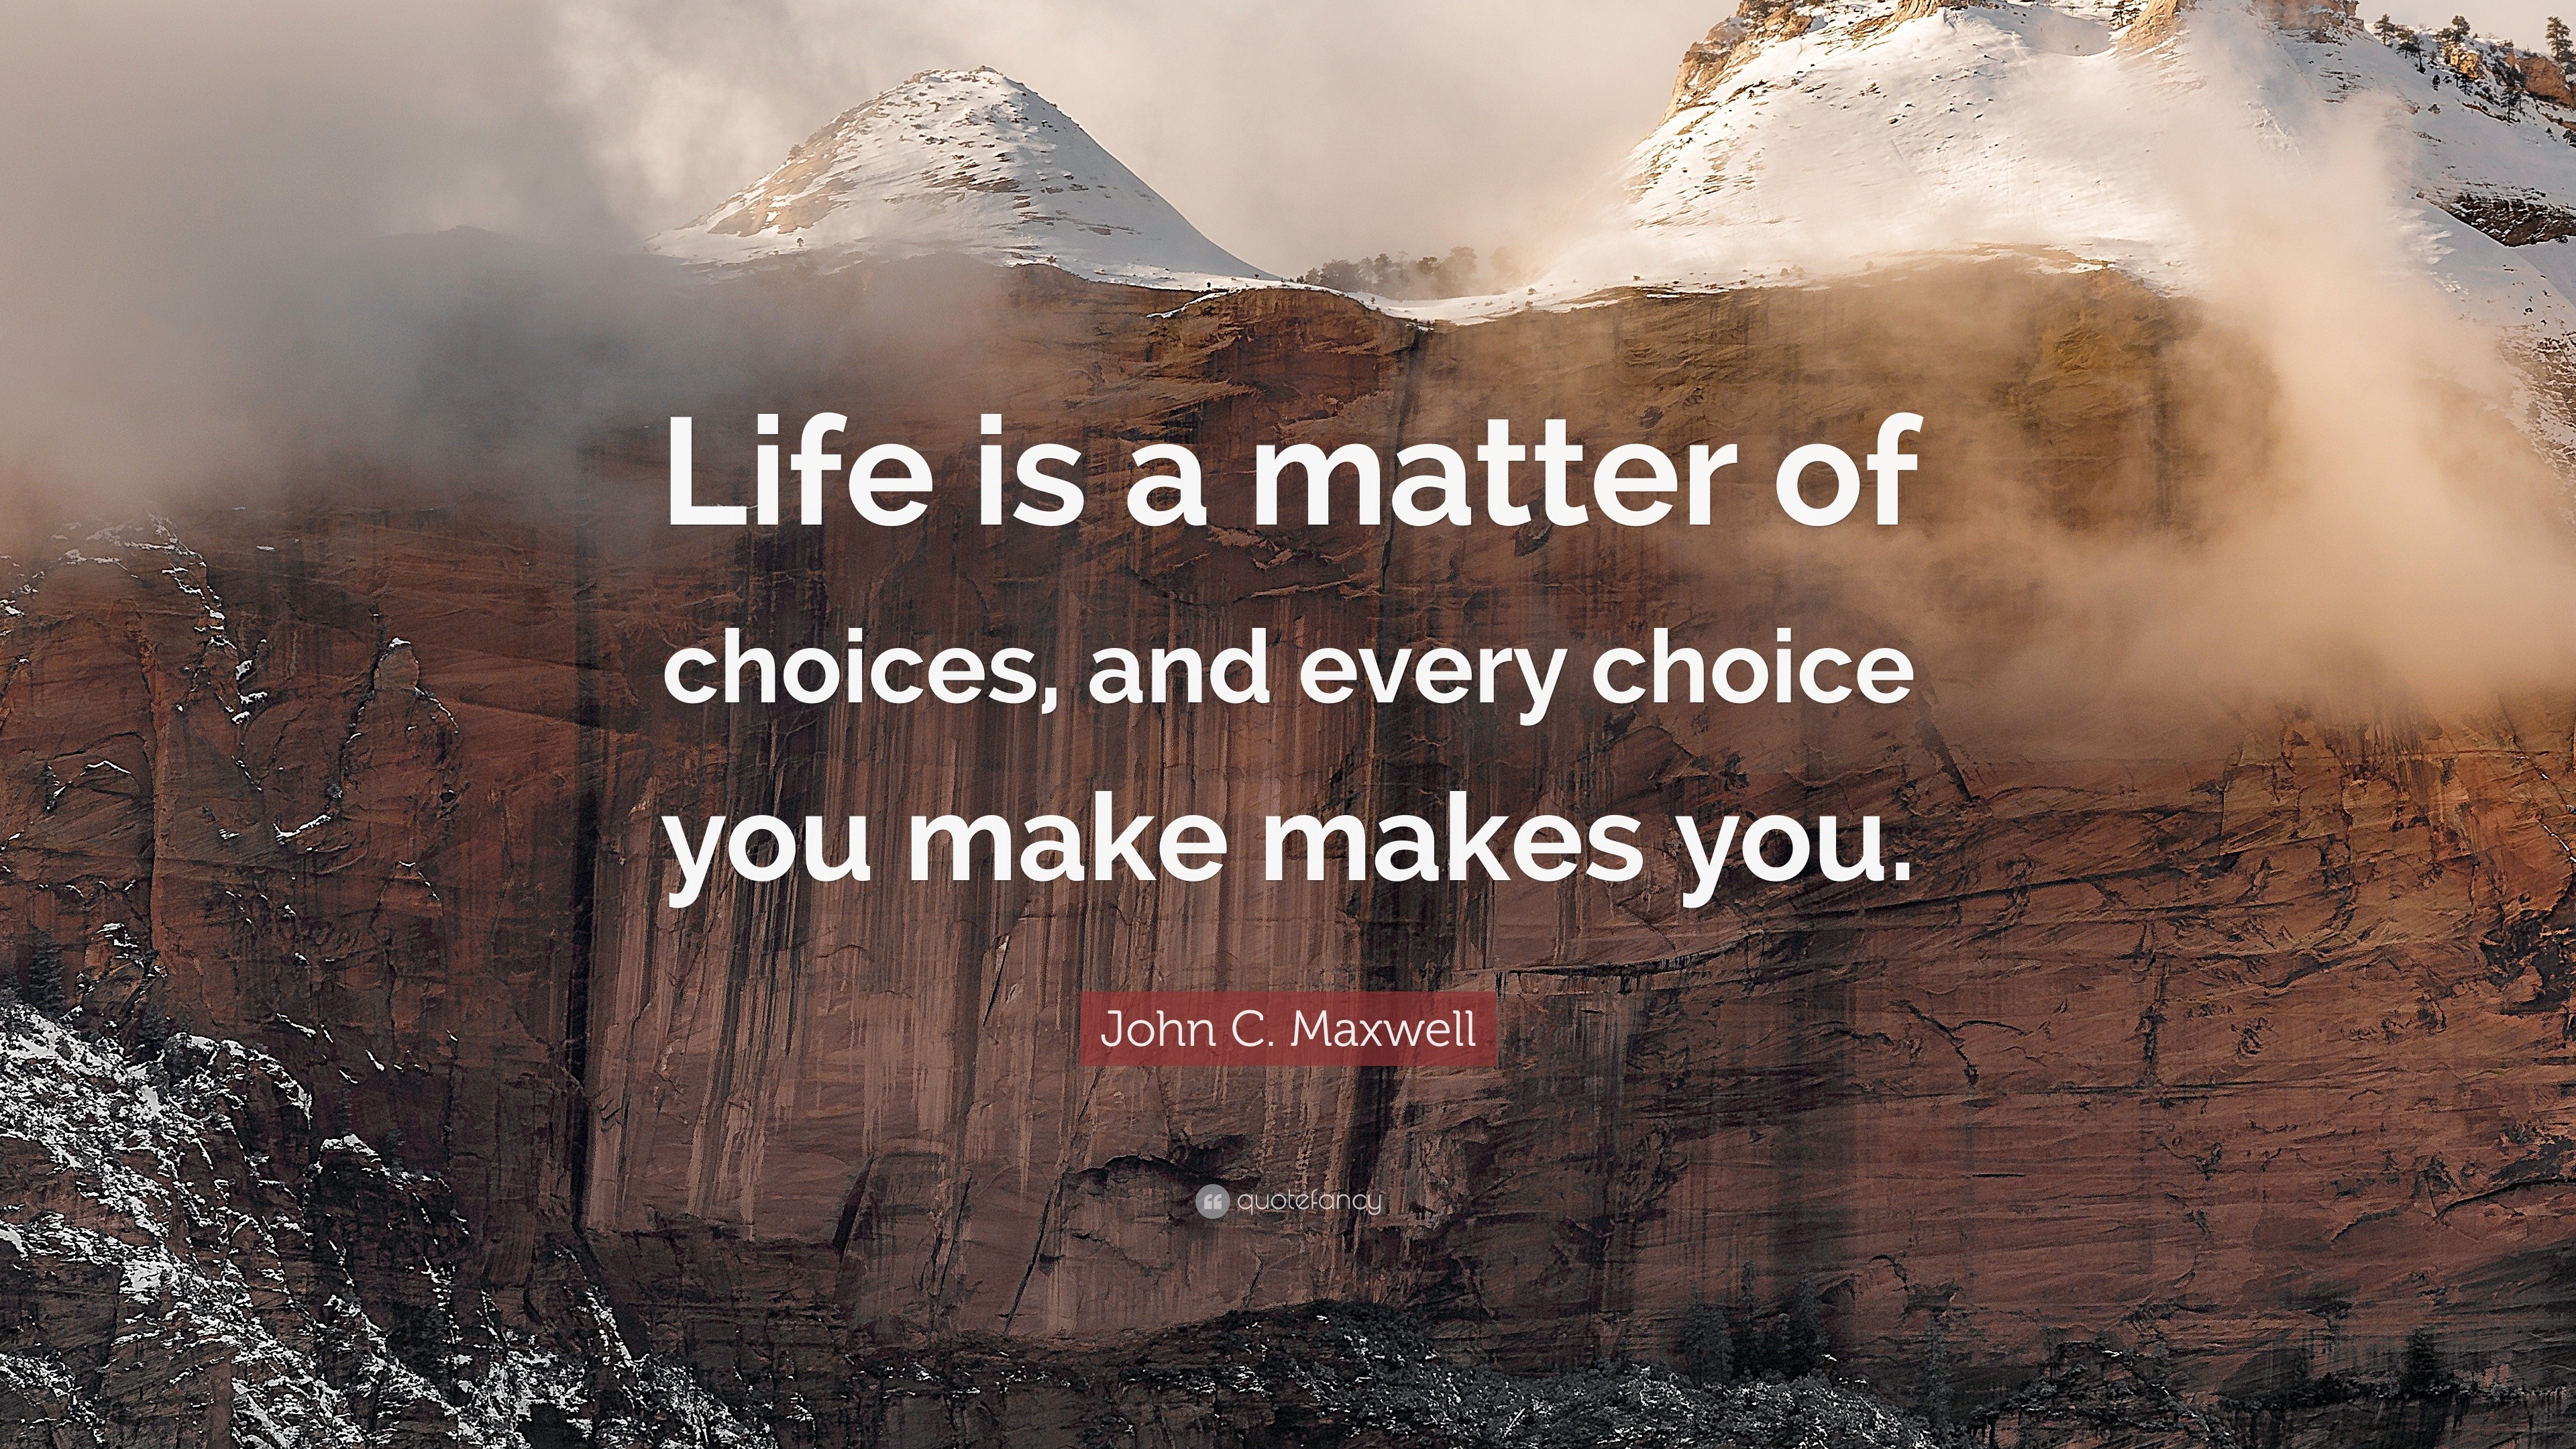 John C. Maxwell Quote “Life is a matter of choices, and